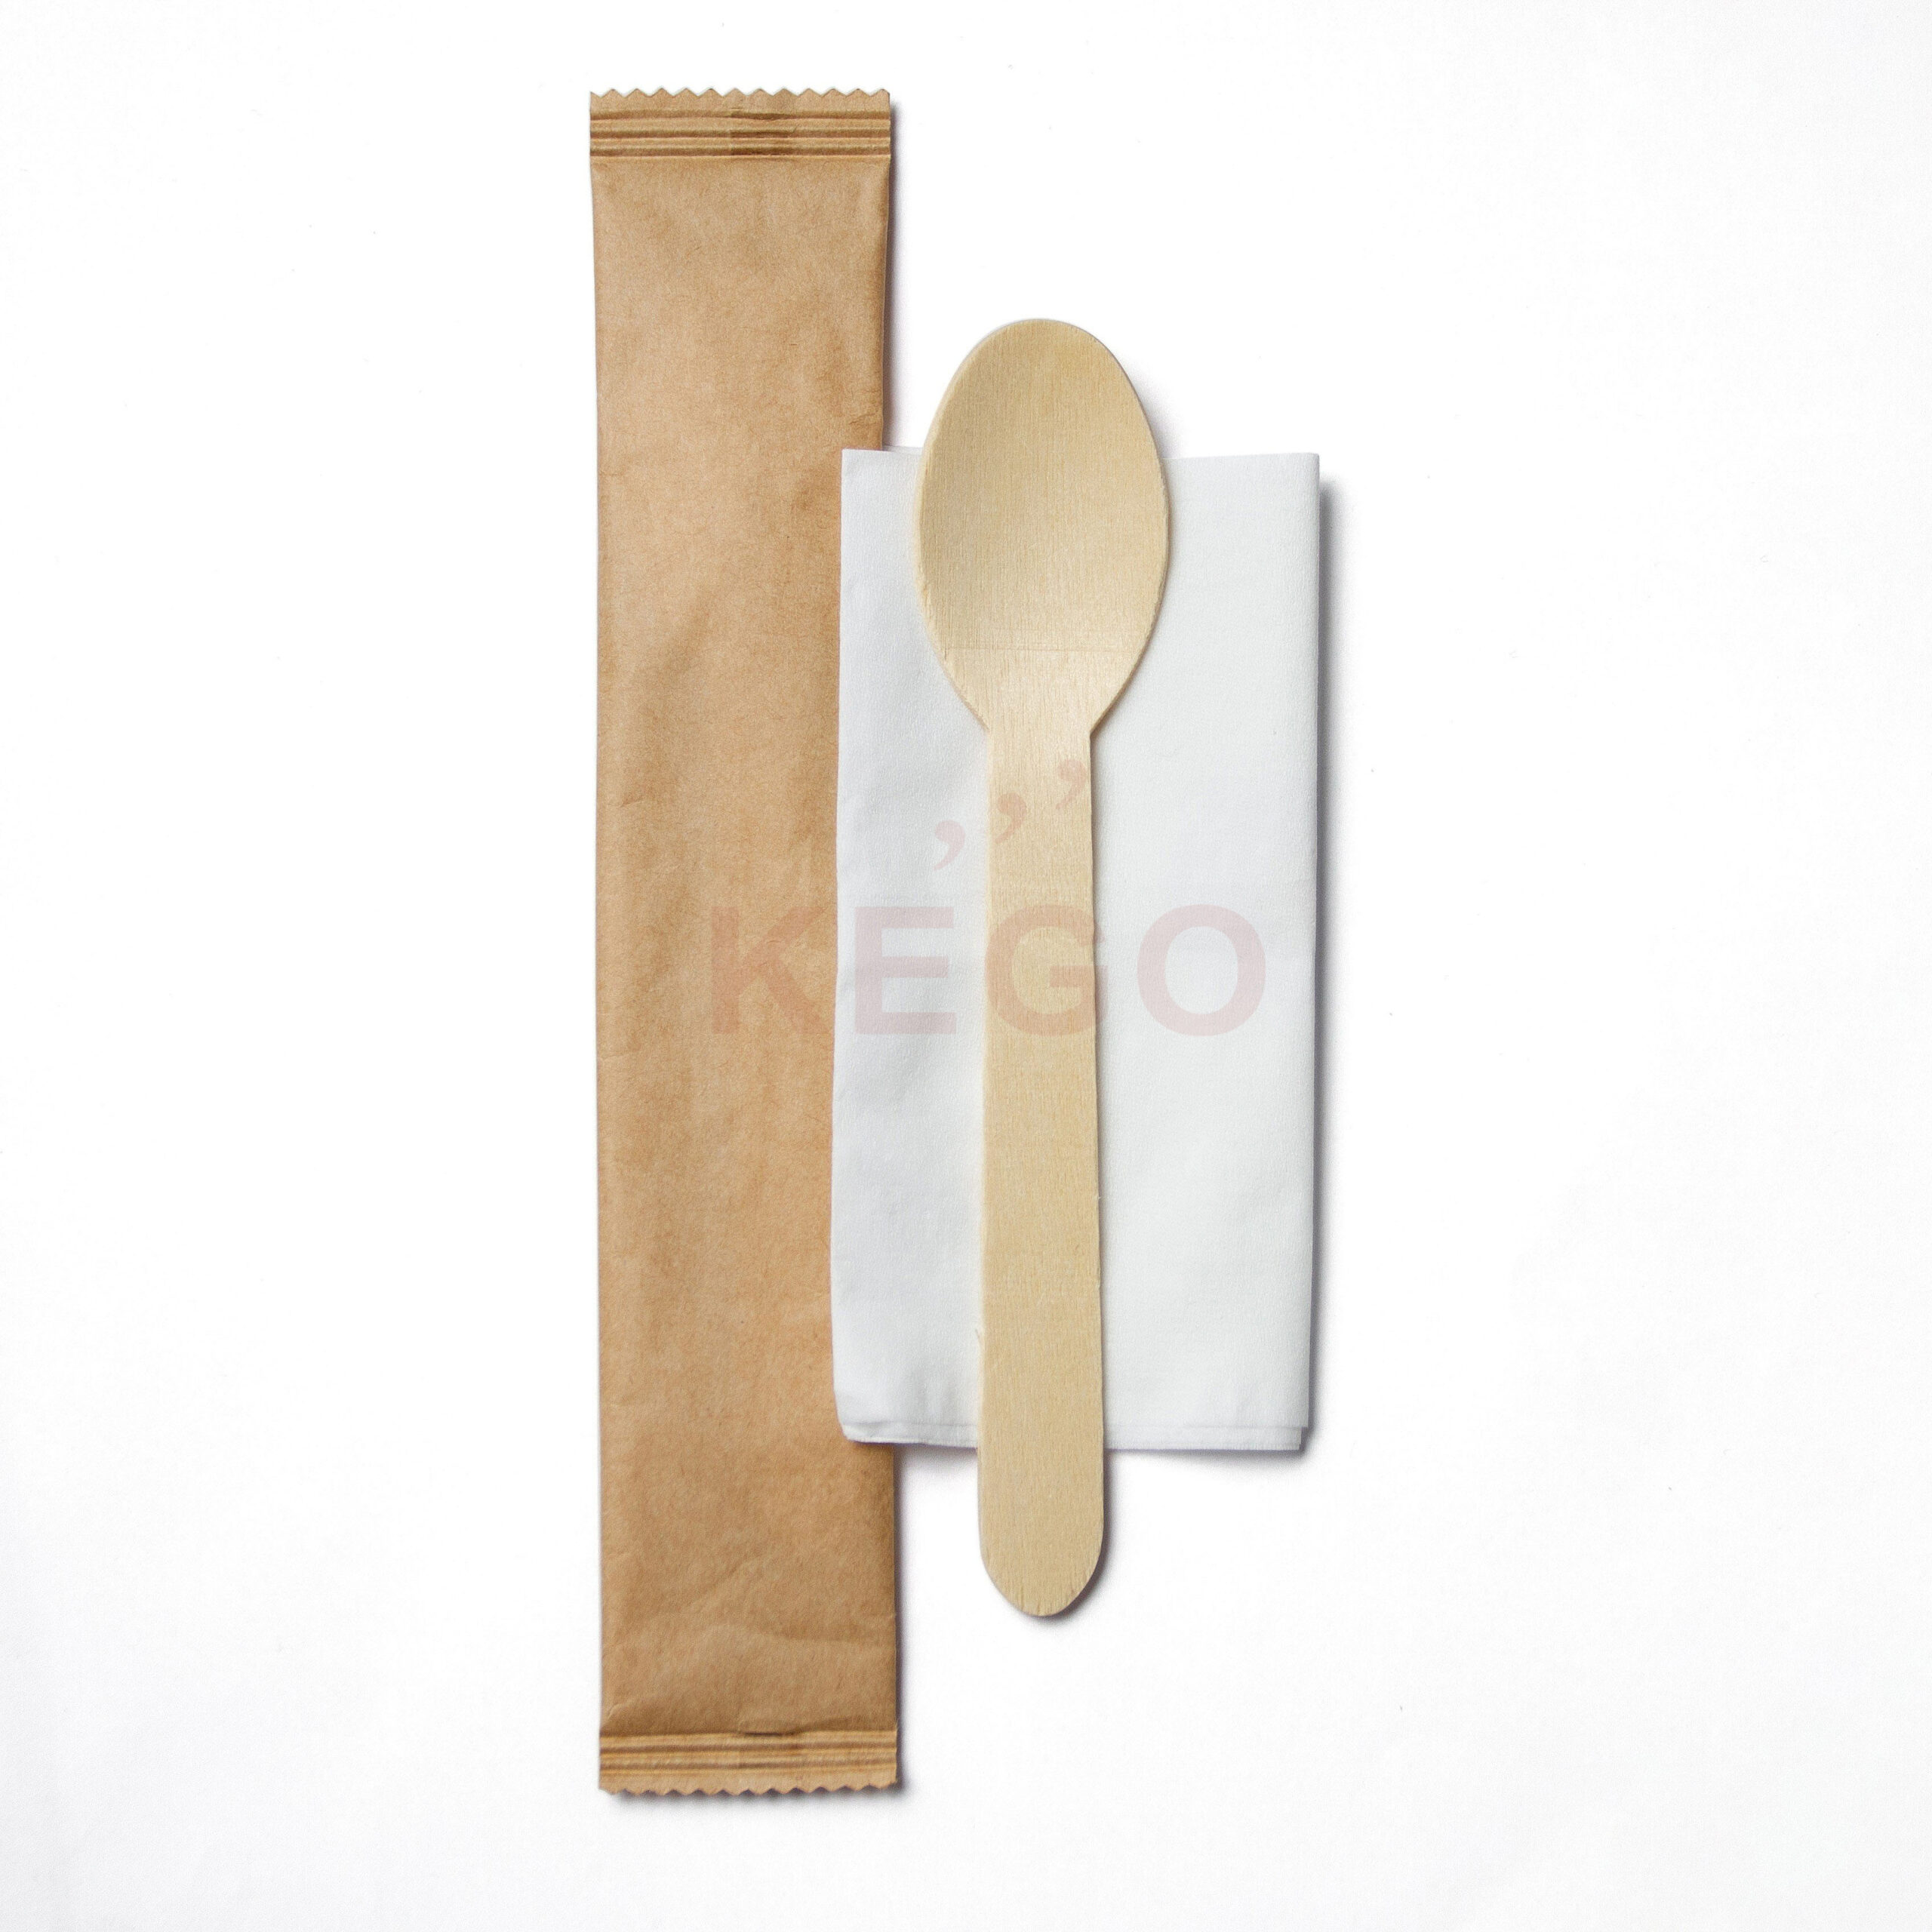 https://disposablewoodencutlery.com/wp-content/uploads/2015/09/Mix-Set-With-Napkin-2-1-scaled.jpg